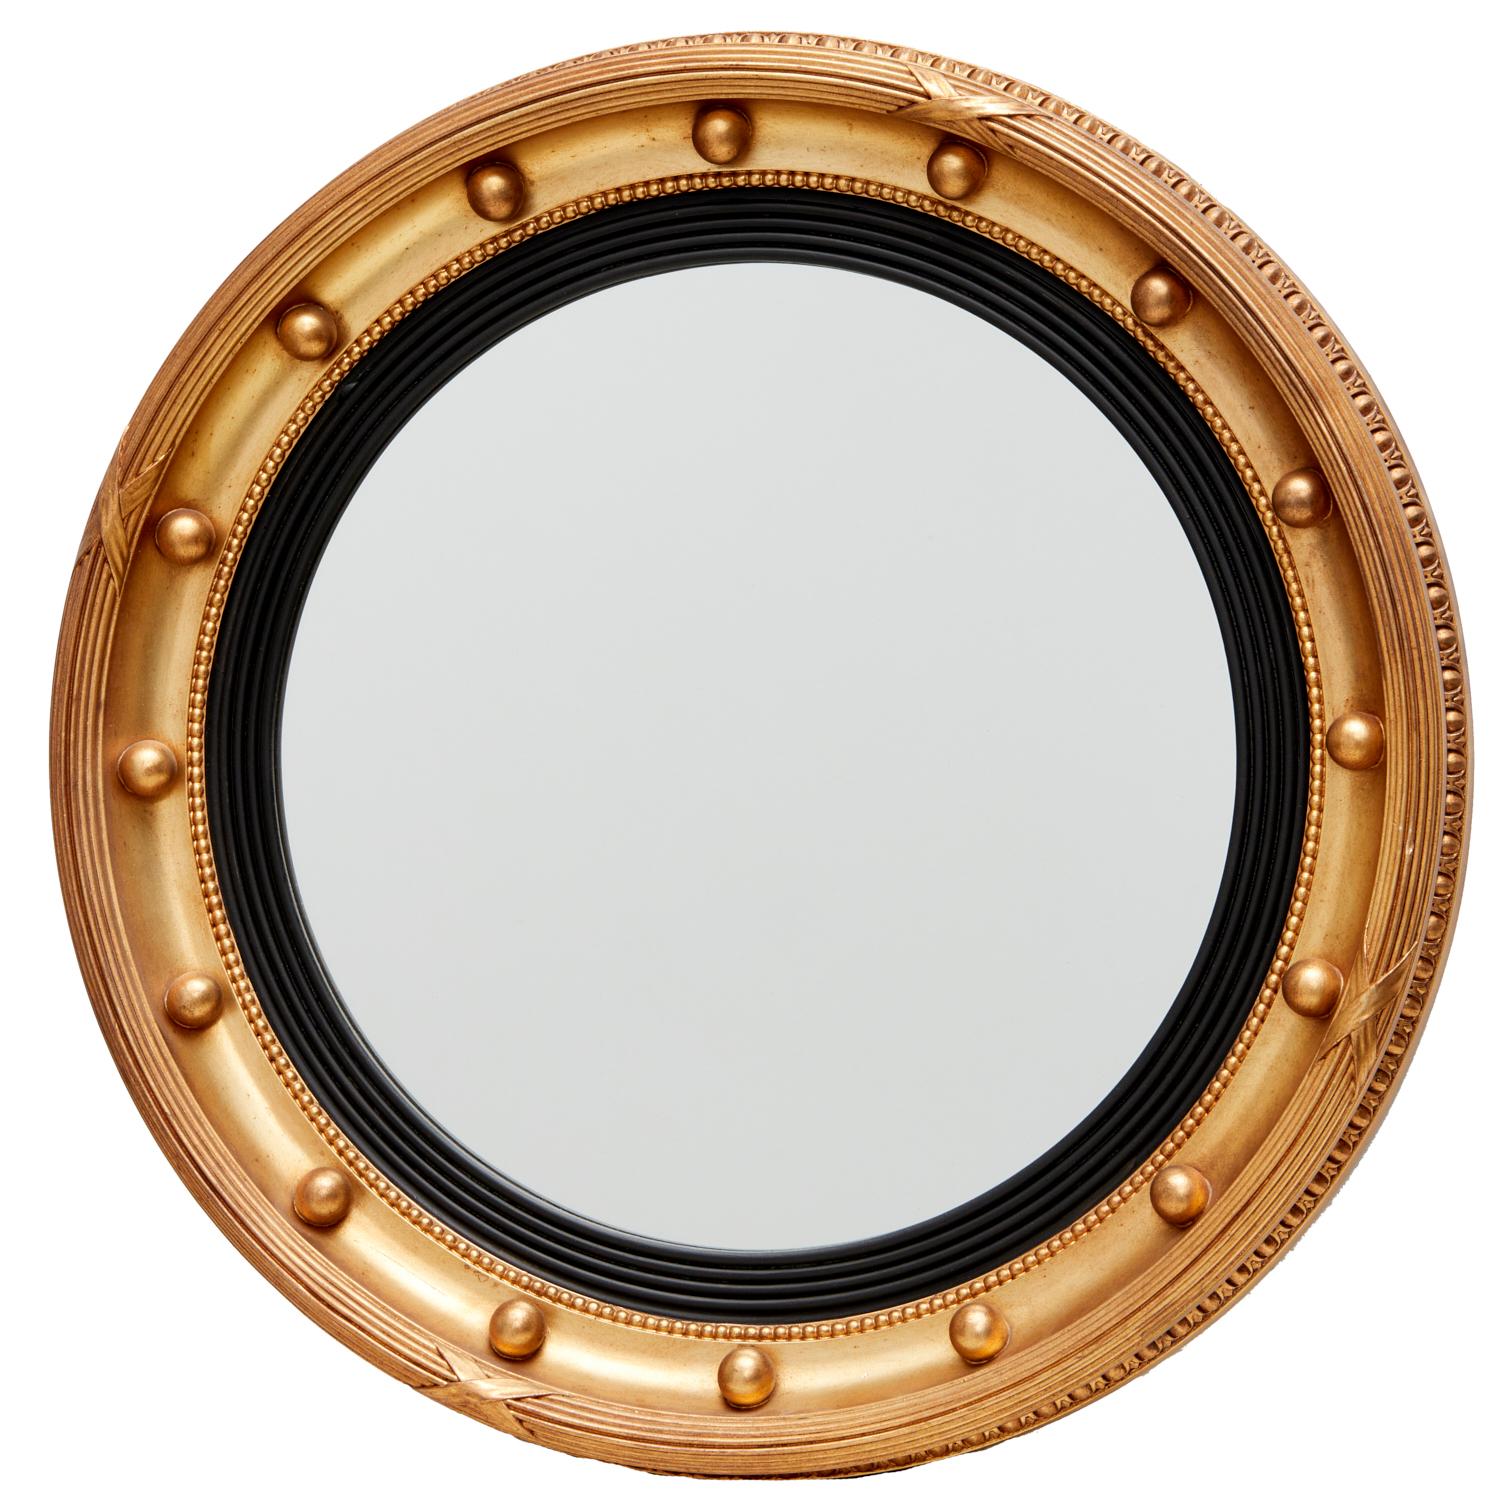 20th c., American Federal style round bull's-eye giltwood and ebonized mirror. 

The circular frame, surrounding a mirror plate, is accented with petite spheres and four x-form motifs. The inner section has and ebonized inner reeded molding.

This